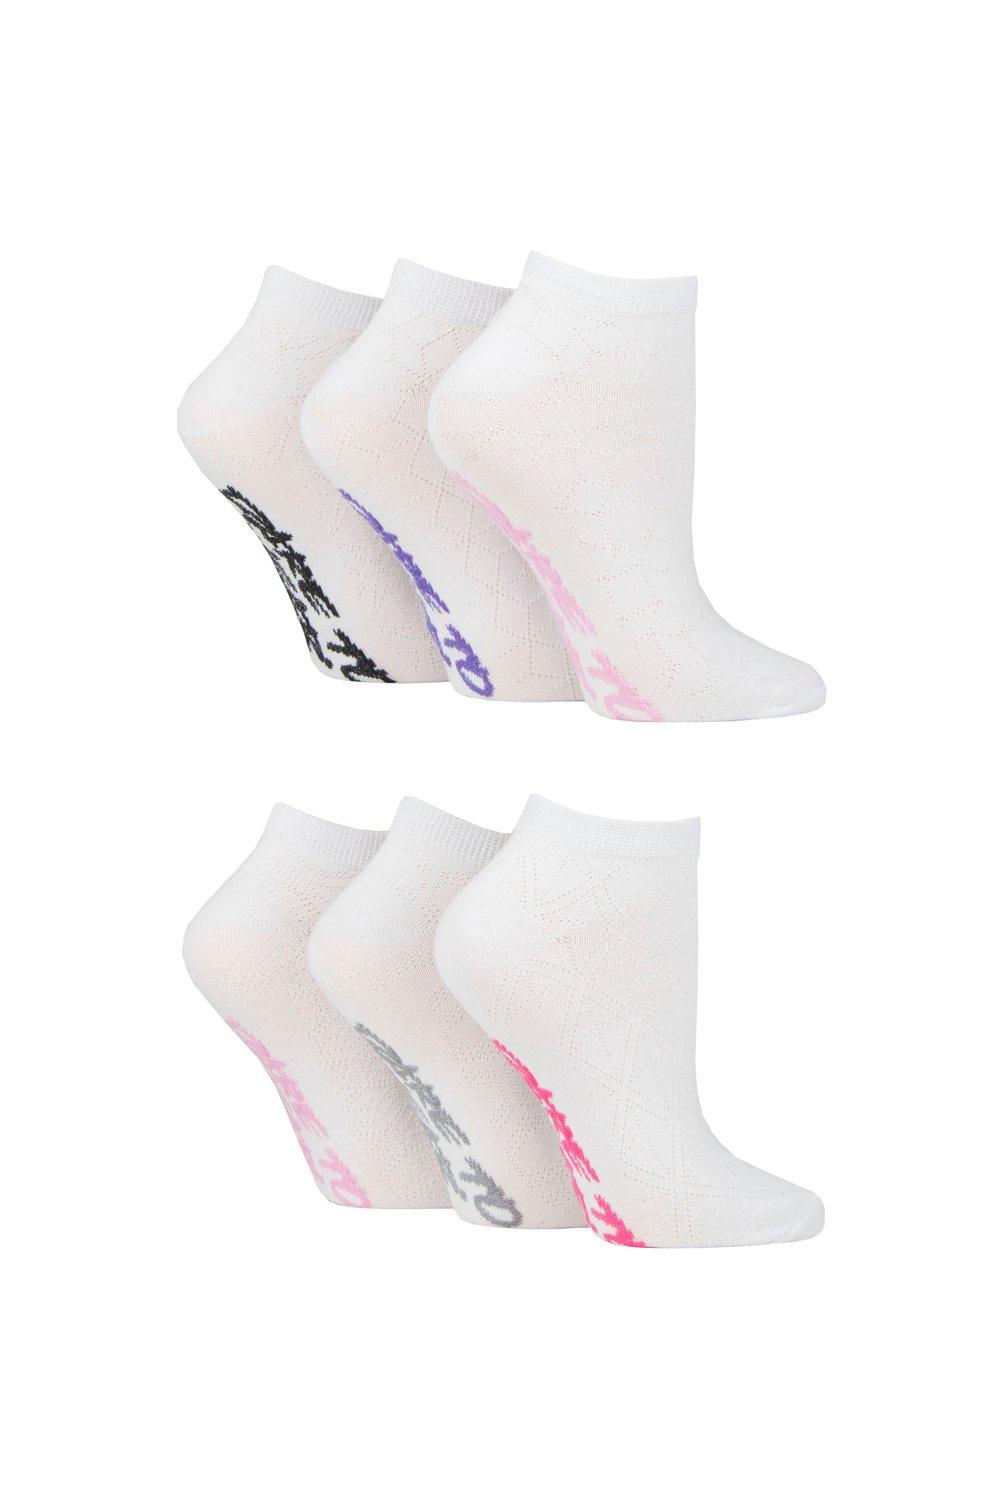 6 Pair Dare to Wear Pique Knit Patterned Trainer Socks